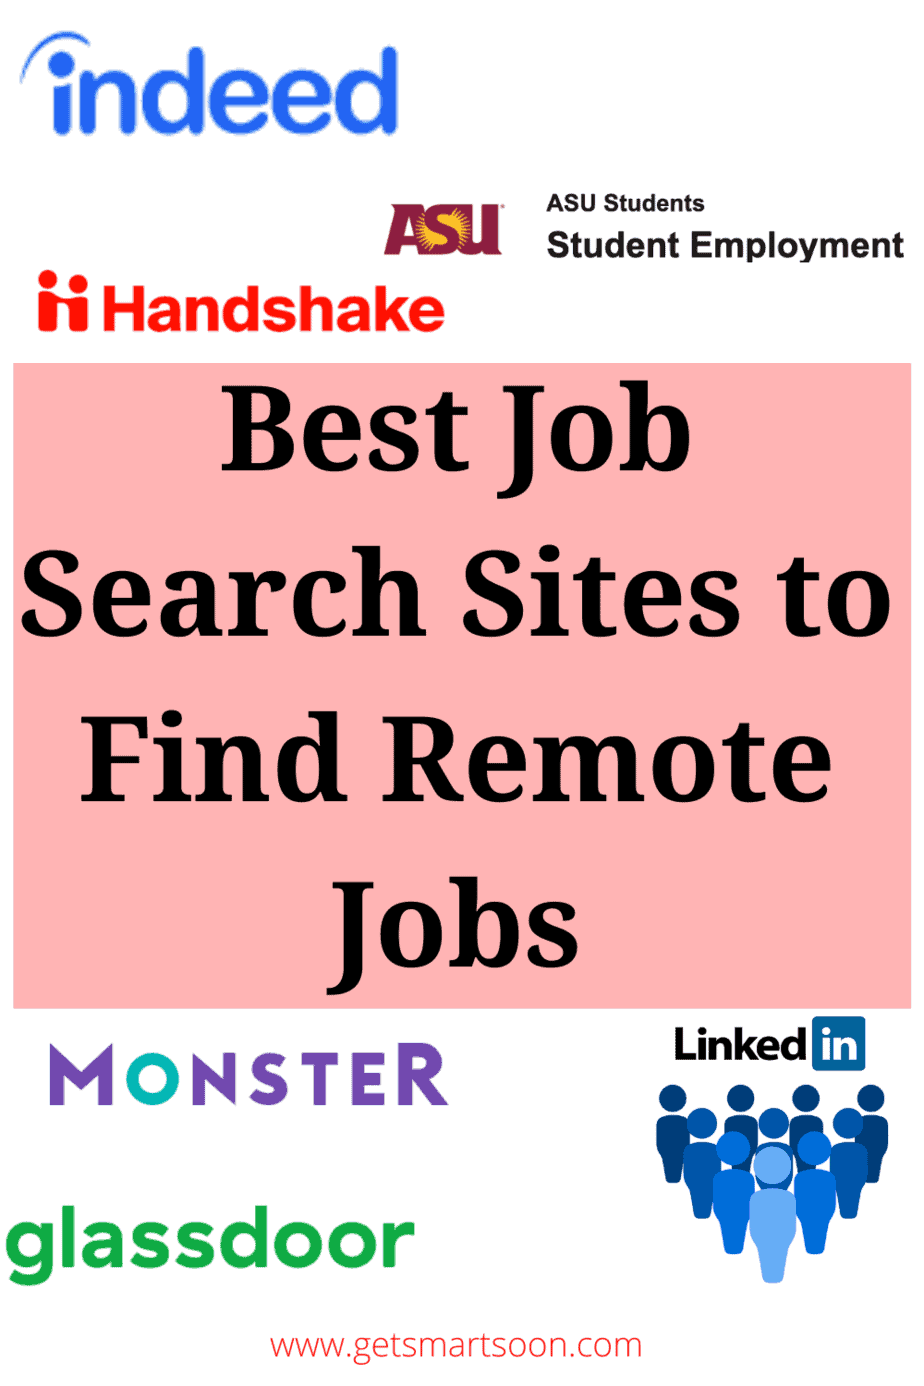 List of the Best Job Search Sites to Find Remote Jobs